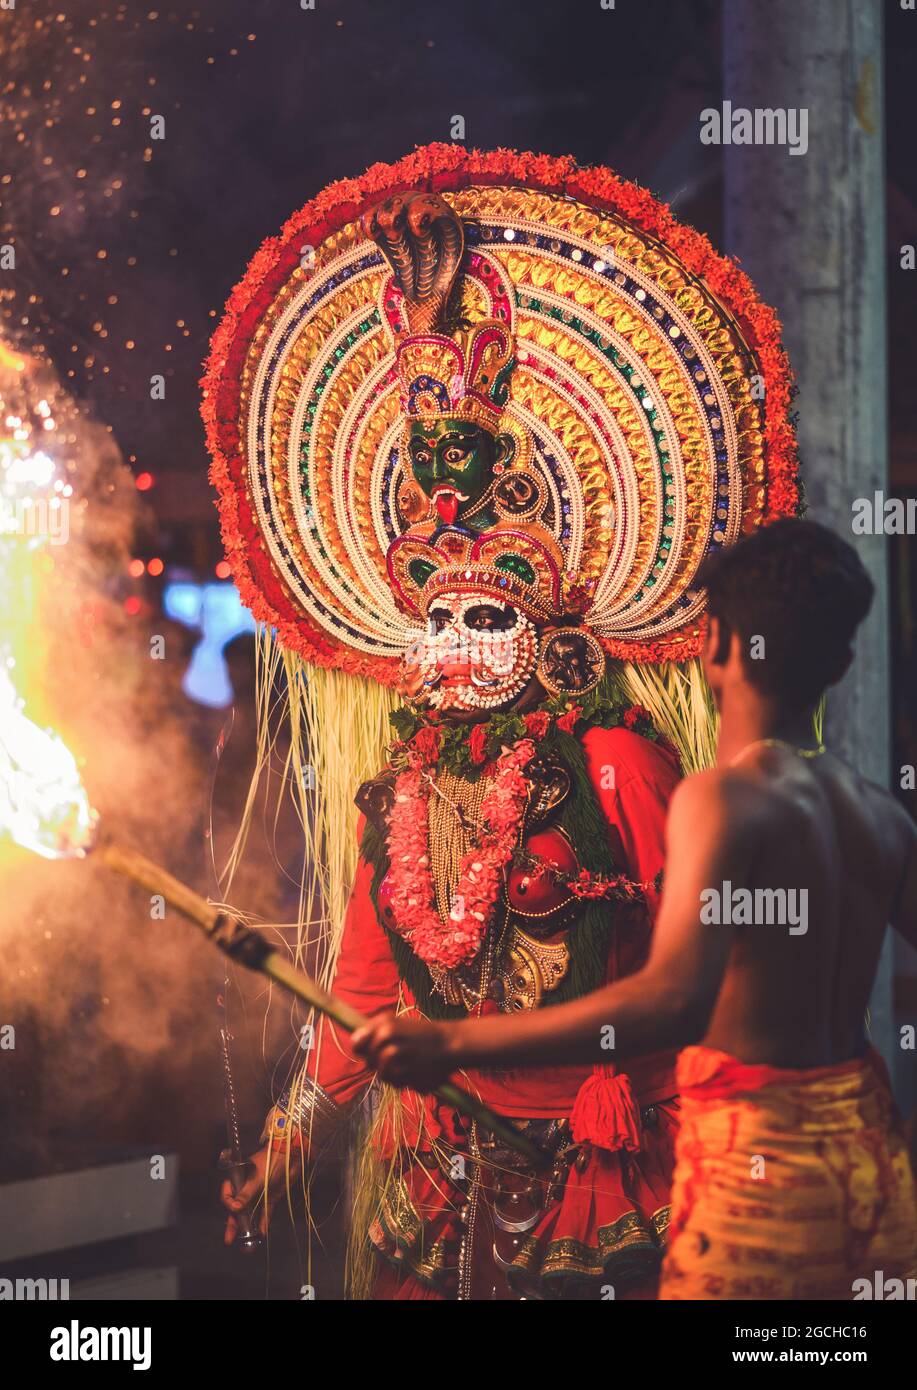 Mudiyettu is a traditional ritual theatre and folk dance drama from Kerala that enacts the mythological tale of a battle between the Kali and Darika Stock Photo